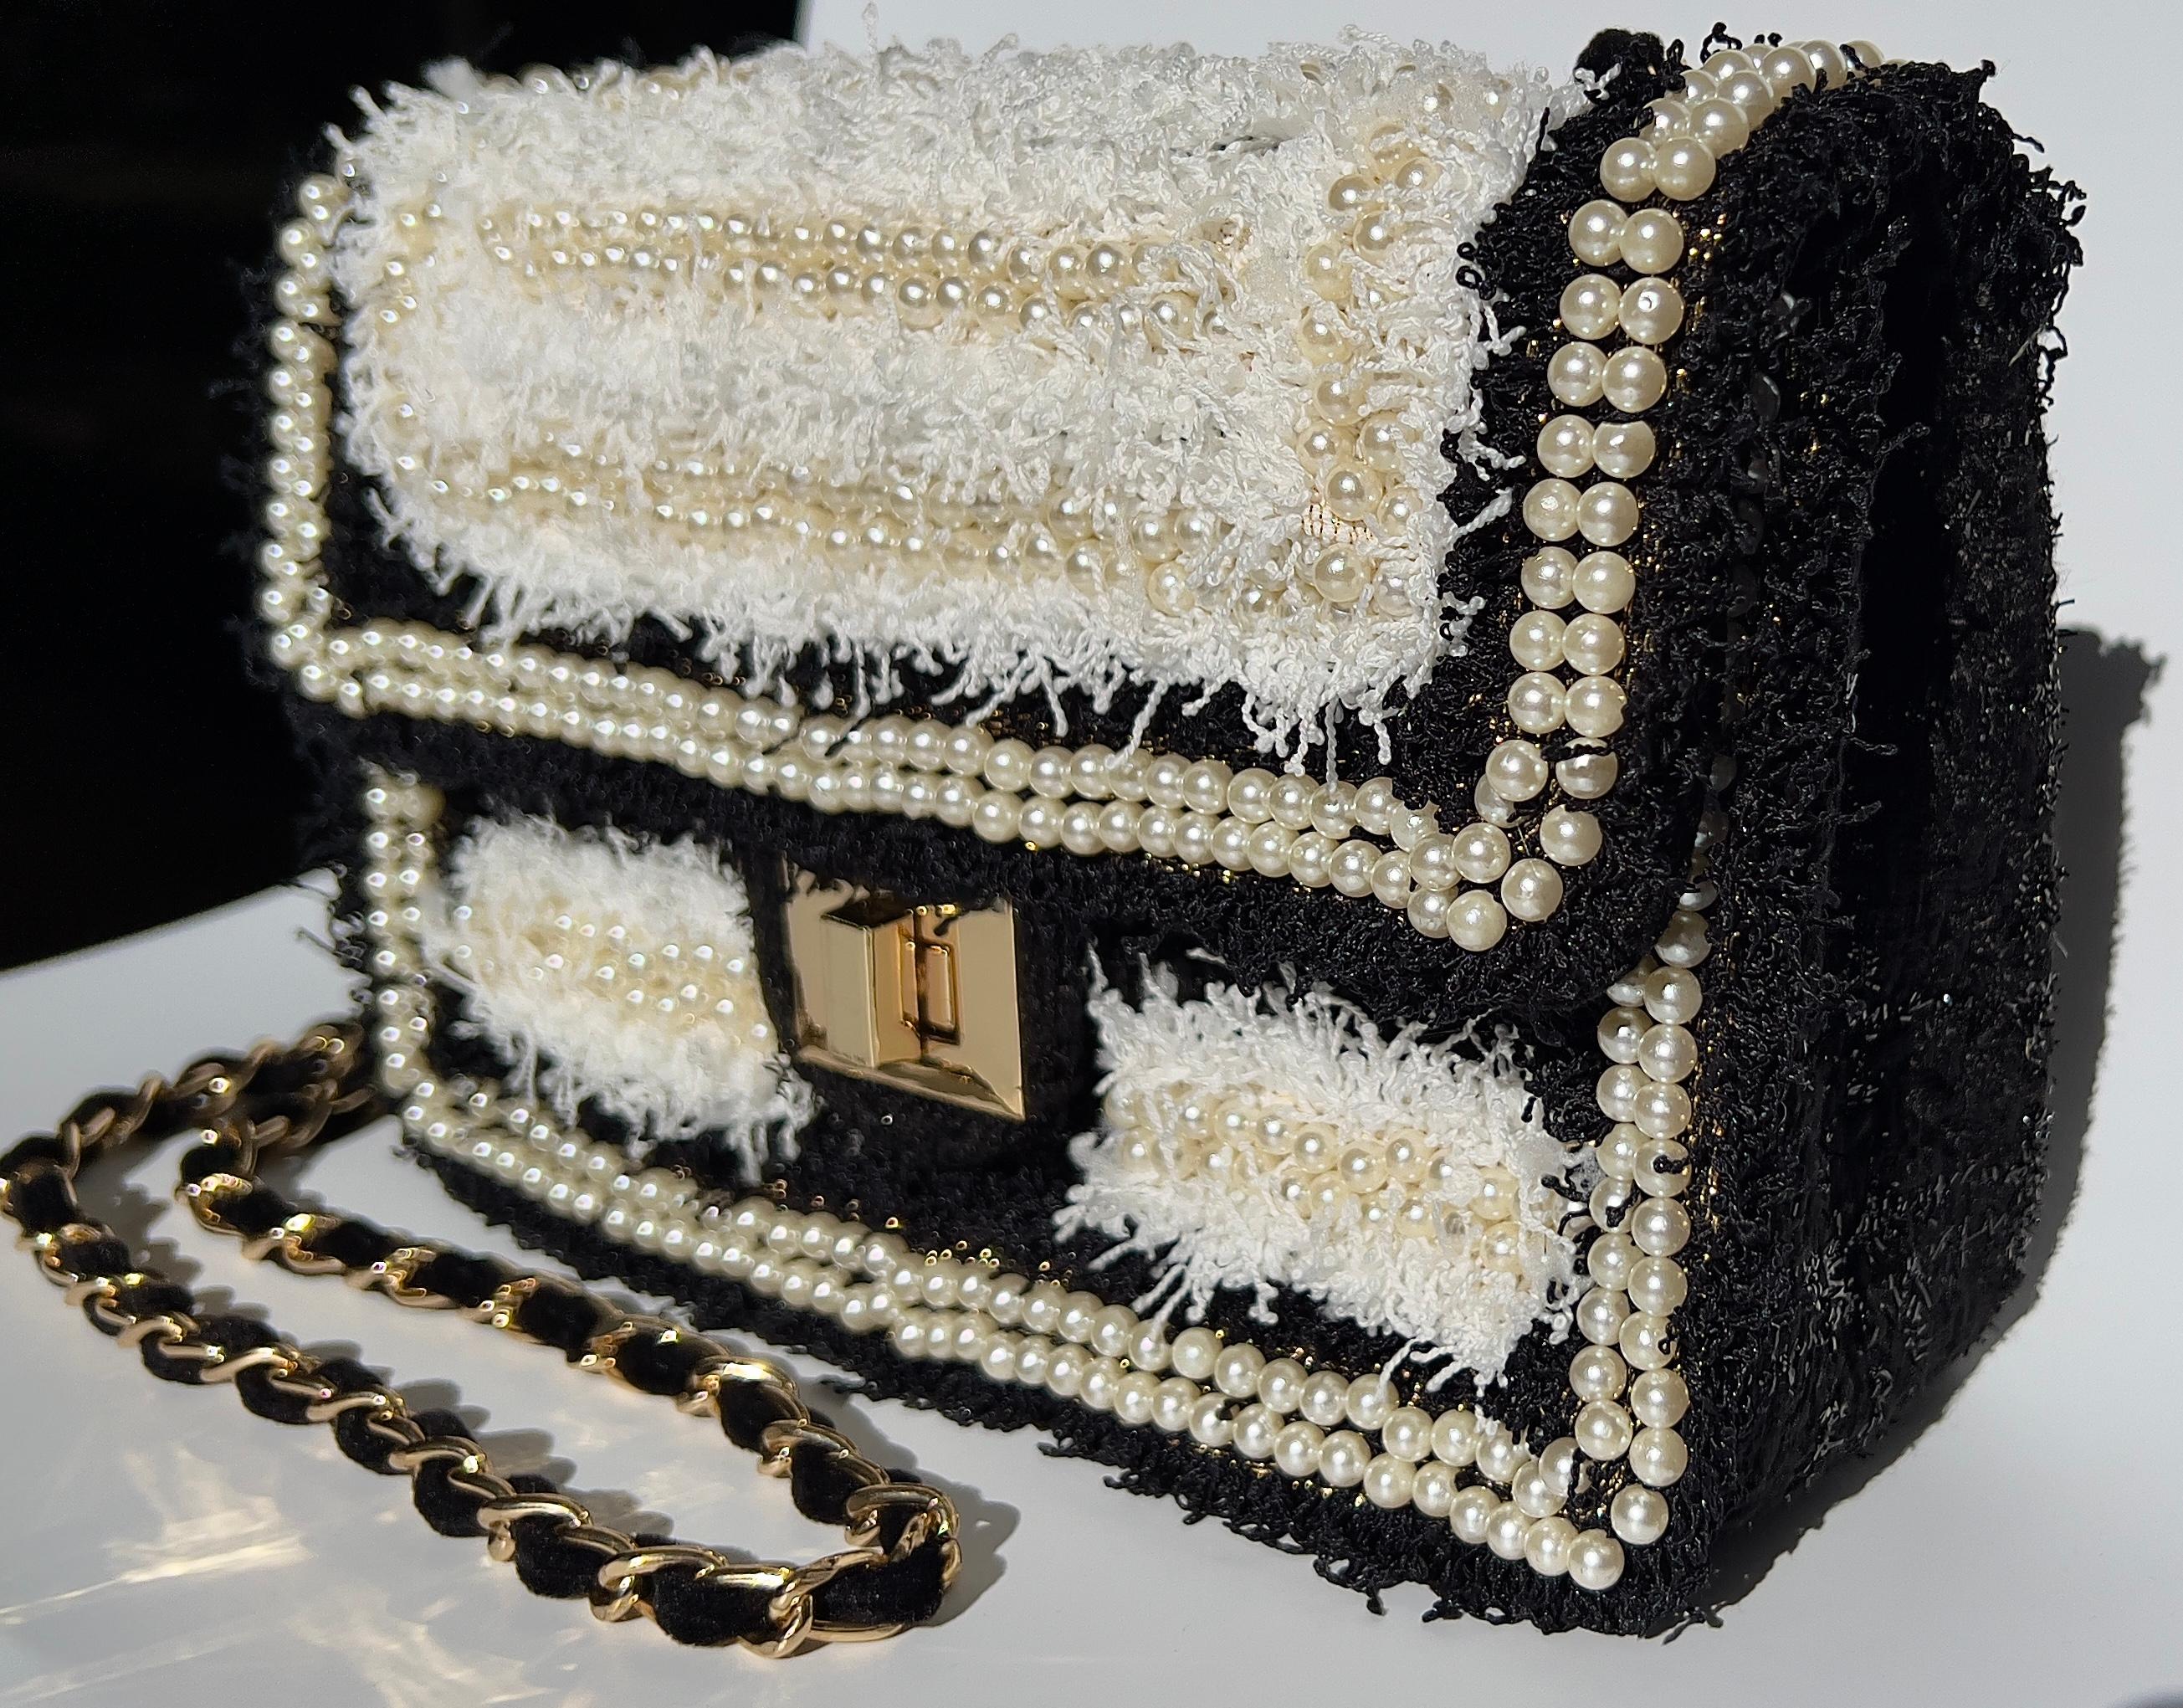 DESCRIPTION
Tweed and faux leather
Encrusted with faux pearls
Non Removable woven velvet chain crossbody strap
Interior pocket

Measurements:
Length: 9in 
Width: 4in 
Height: 6in 
Strap drop: 24in 